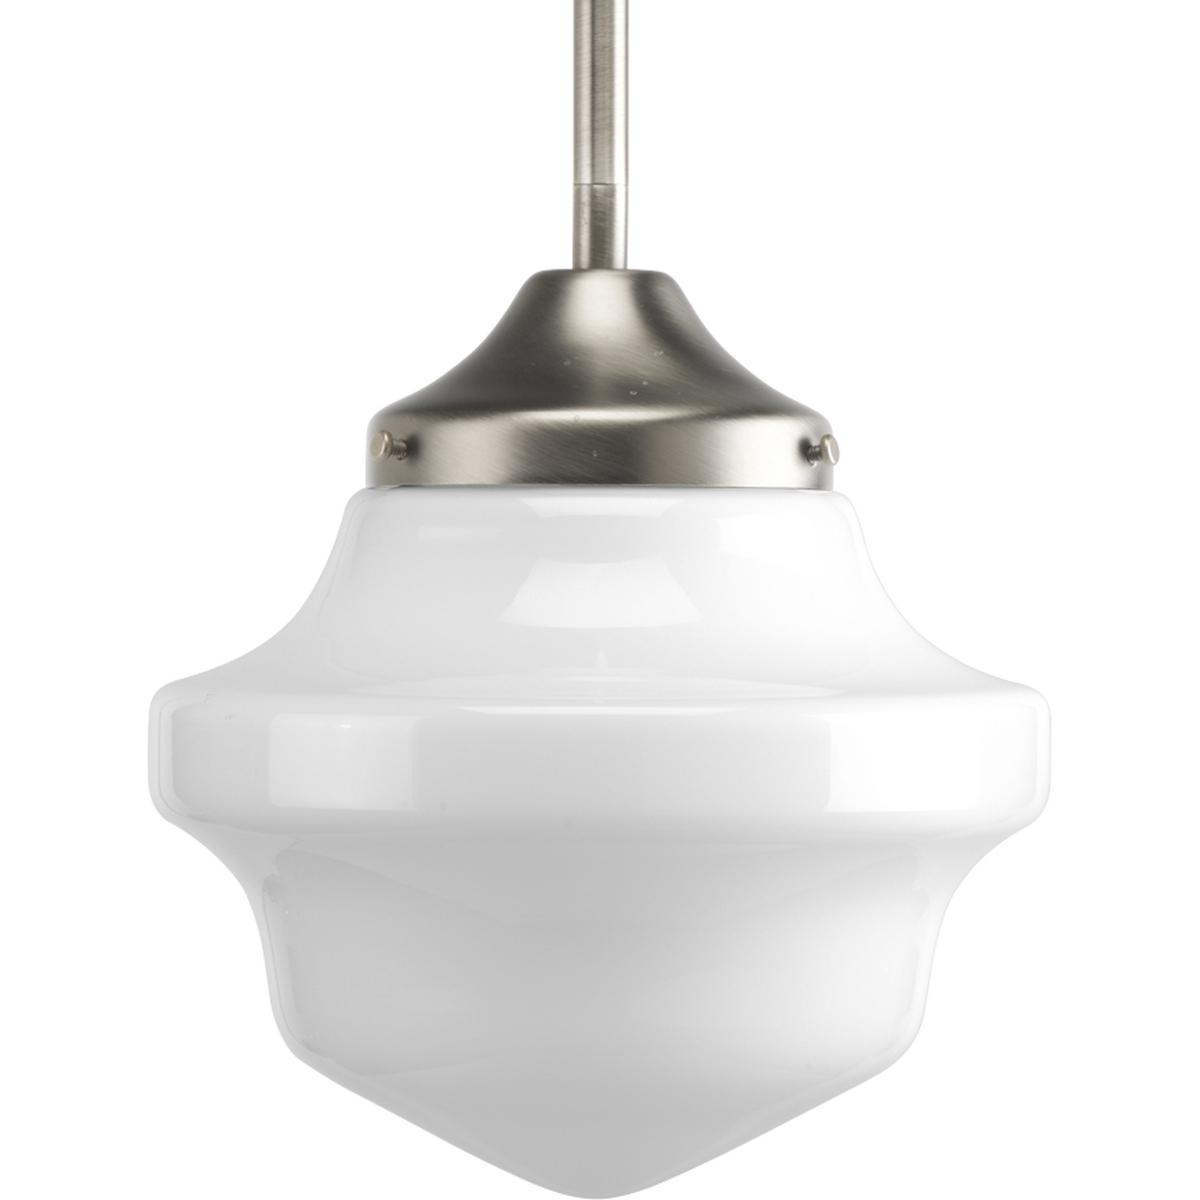 Hubbell P5196-09 One-light mini-pendant with white opal glass and geometric designs working together to give a hint of nostalgia to any decor.  ; Brushed Nickel finish. ; White opal glass. ; Geometric designs. ; Includes two 6", one 12", two 15" stems and 6 links of chain